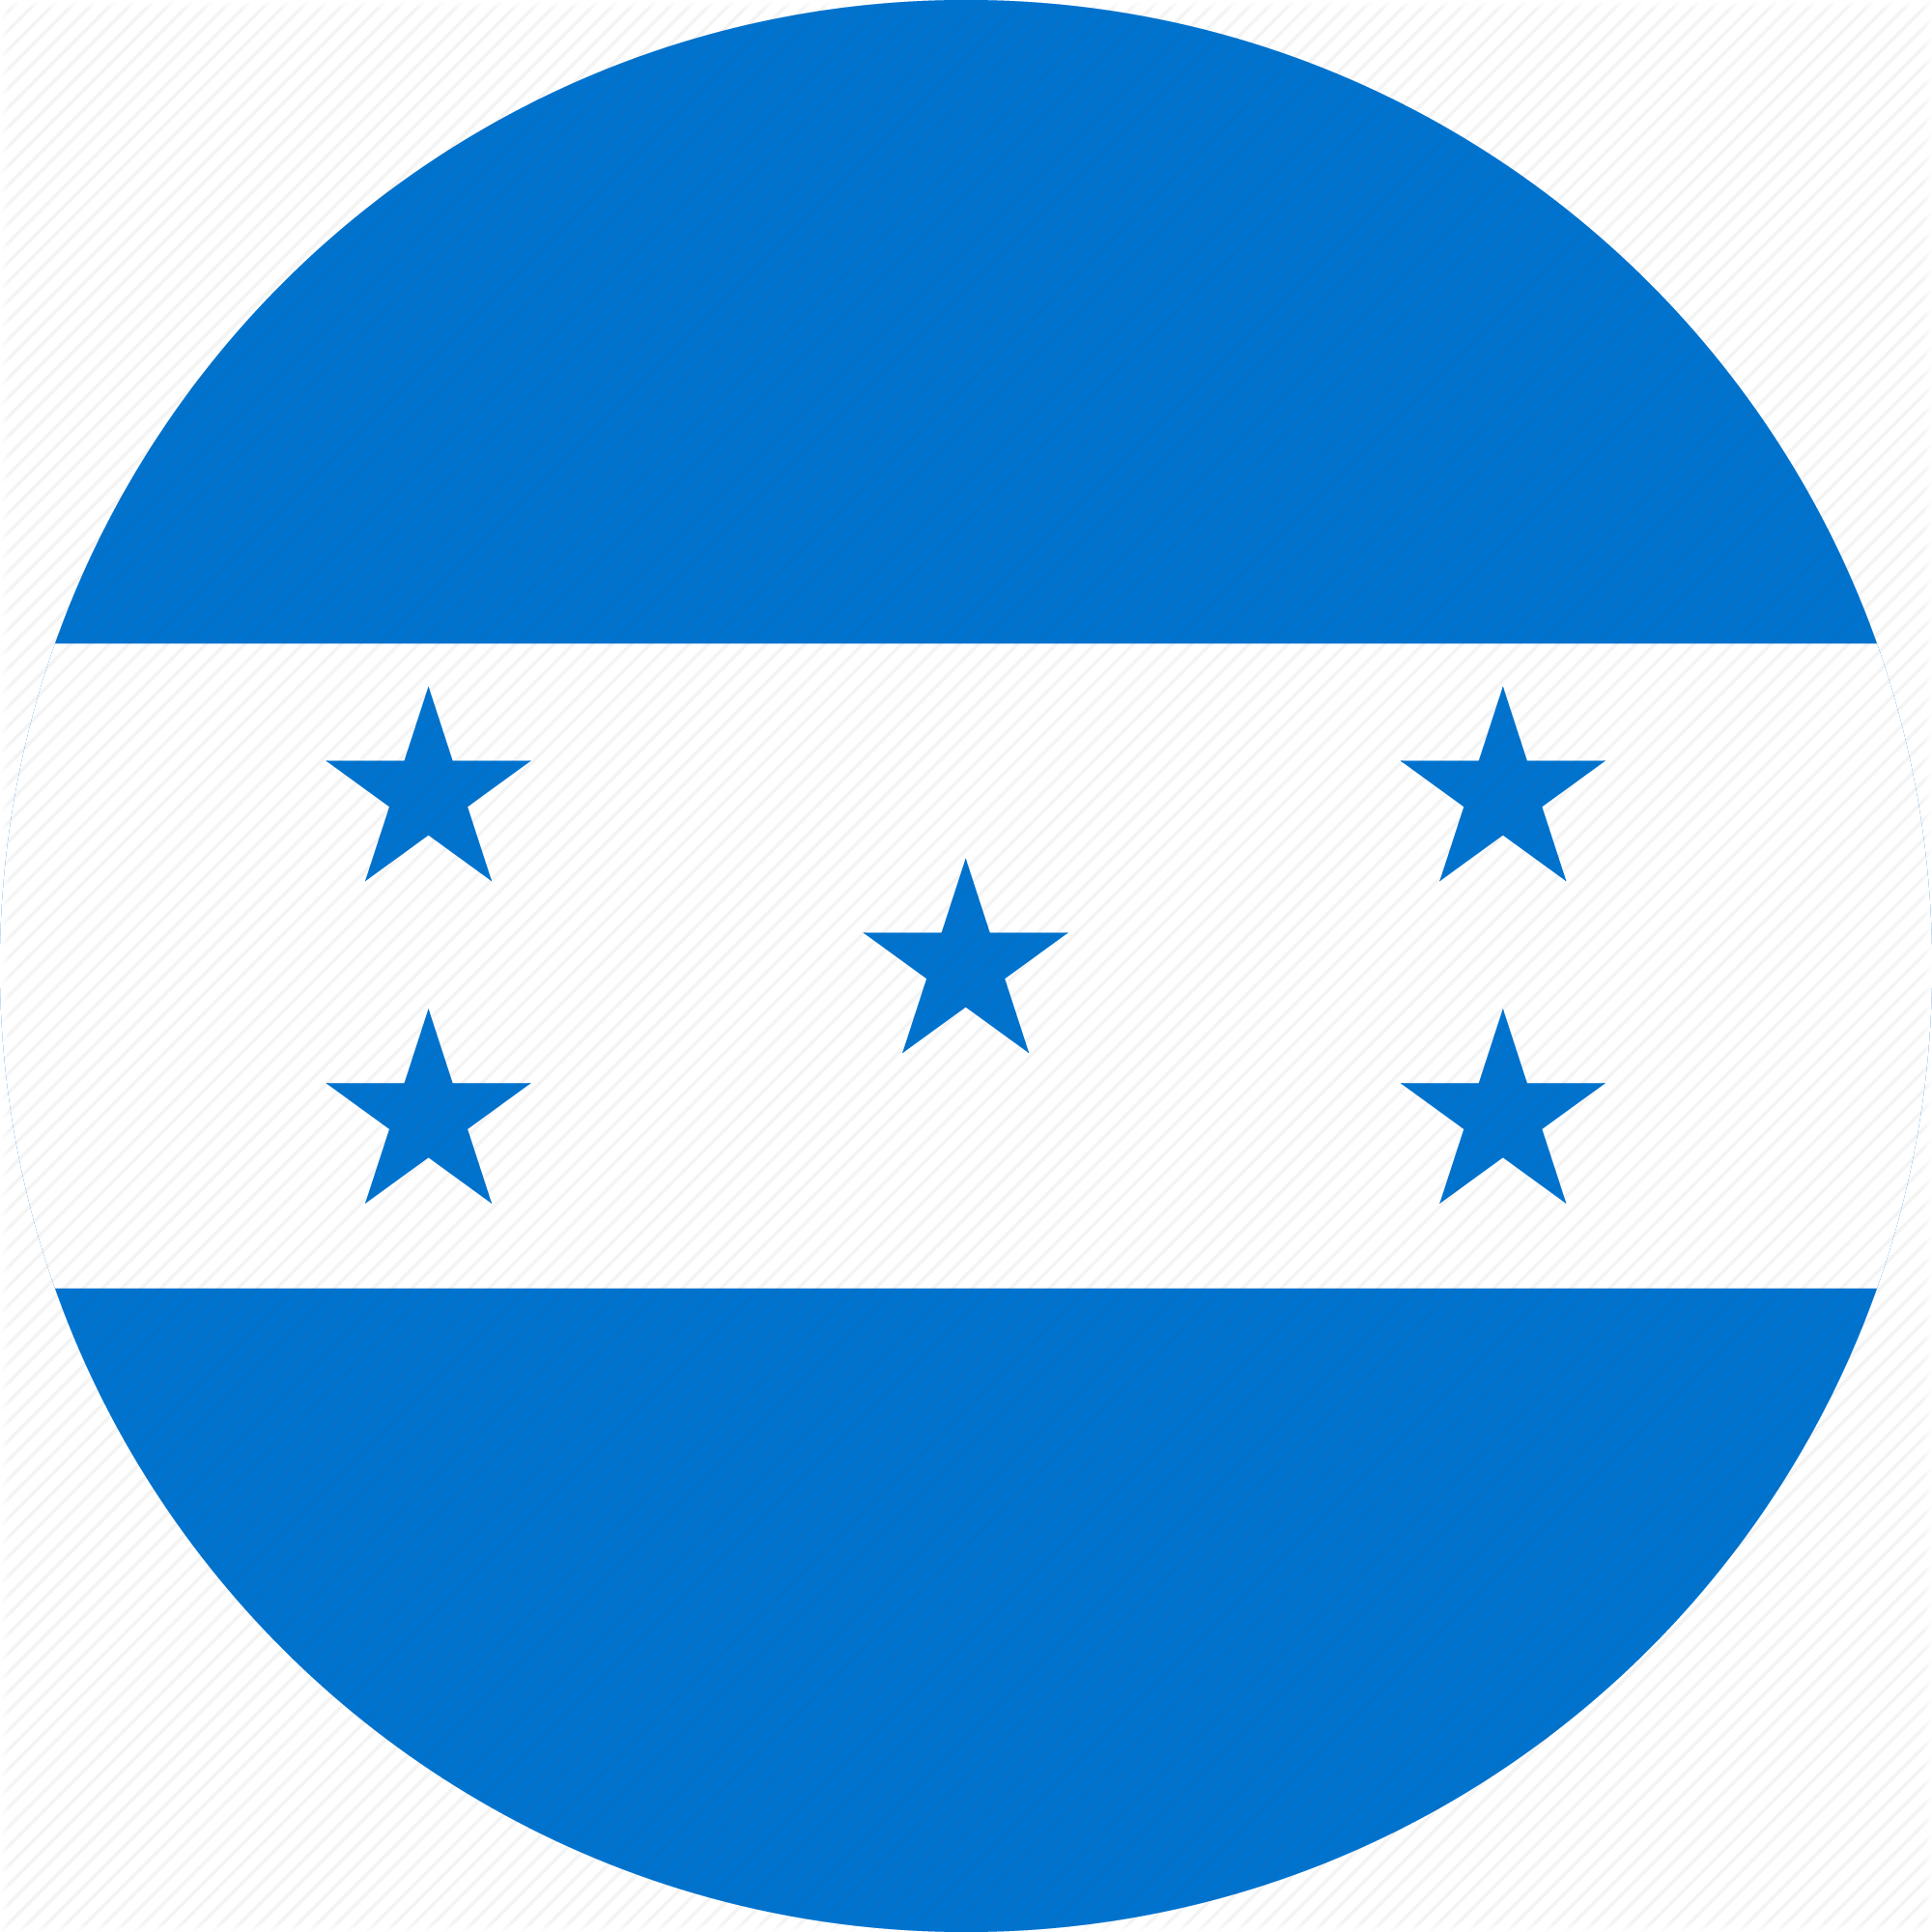 A Blue And White Flag With Stars